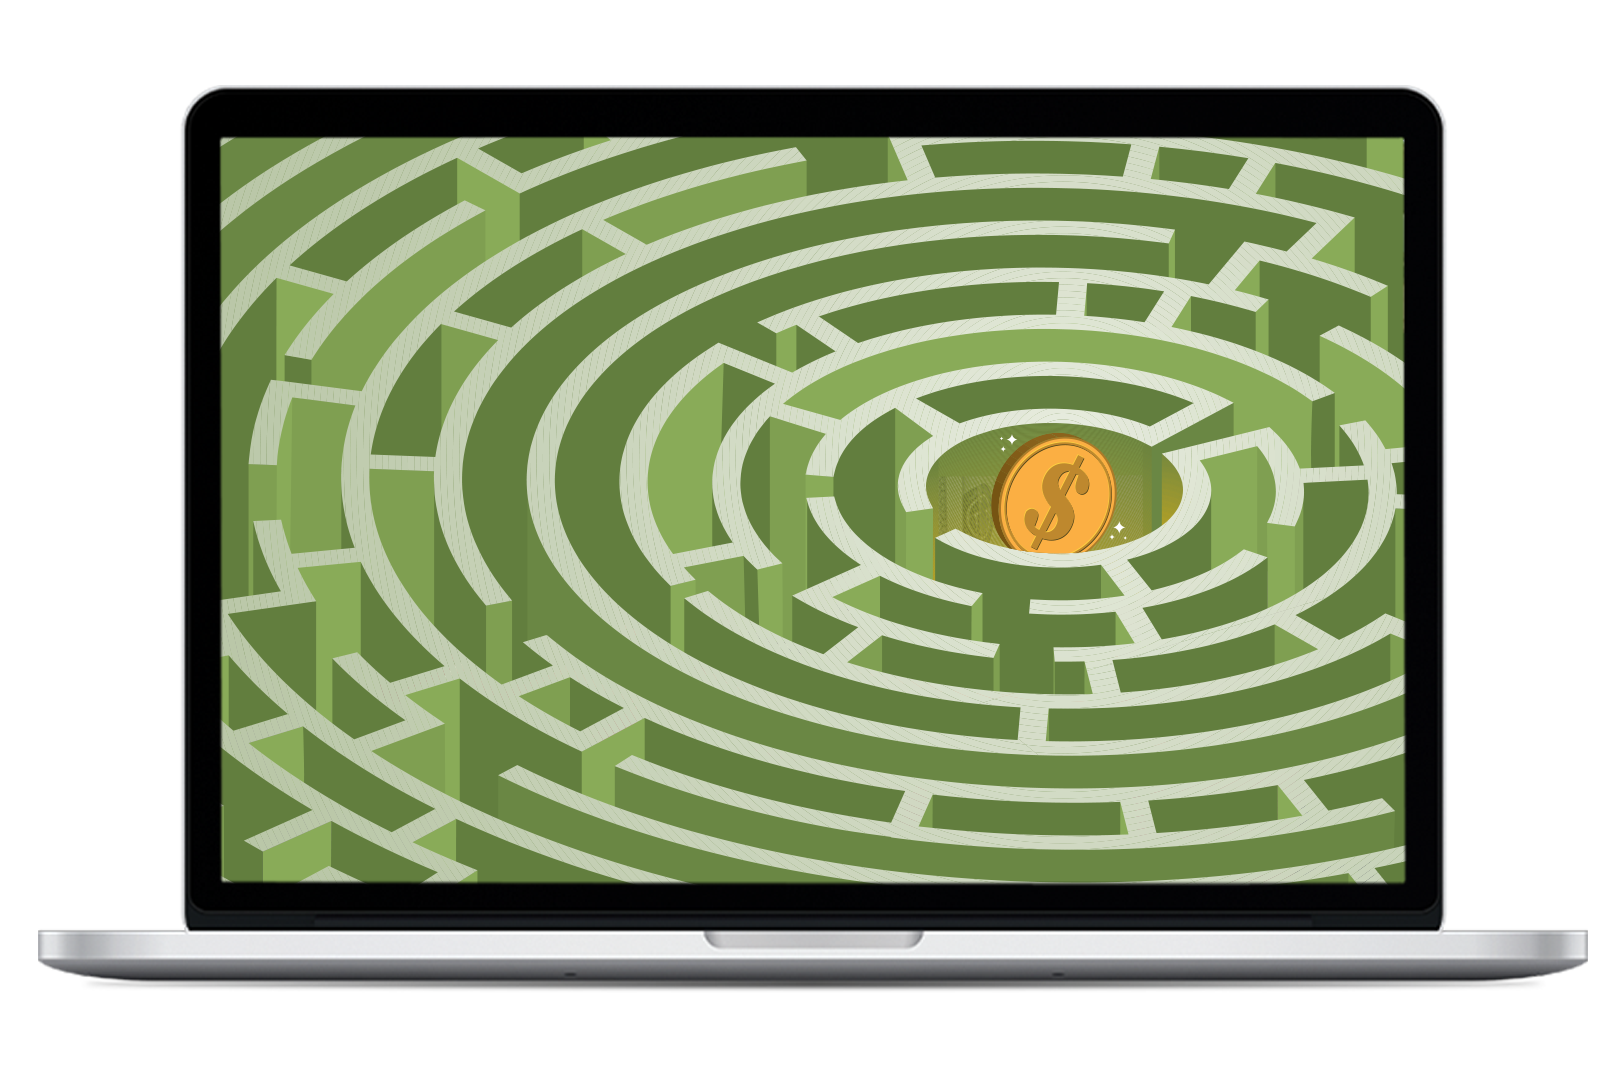 Laptop displaying an image of a maze with a coin in the center